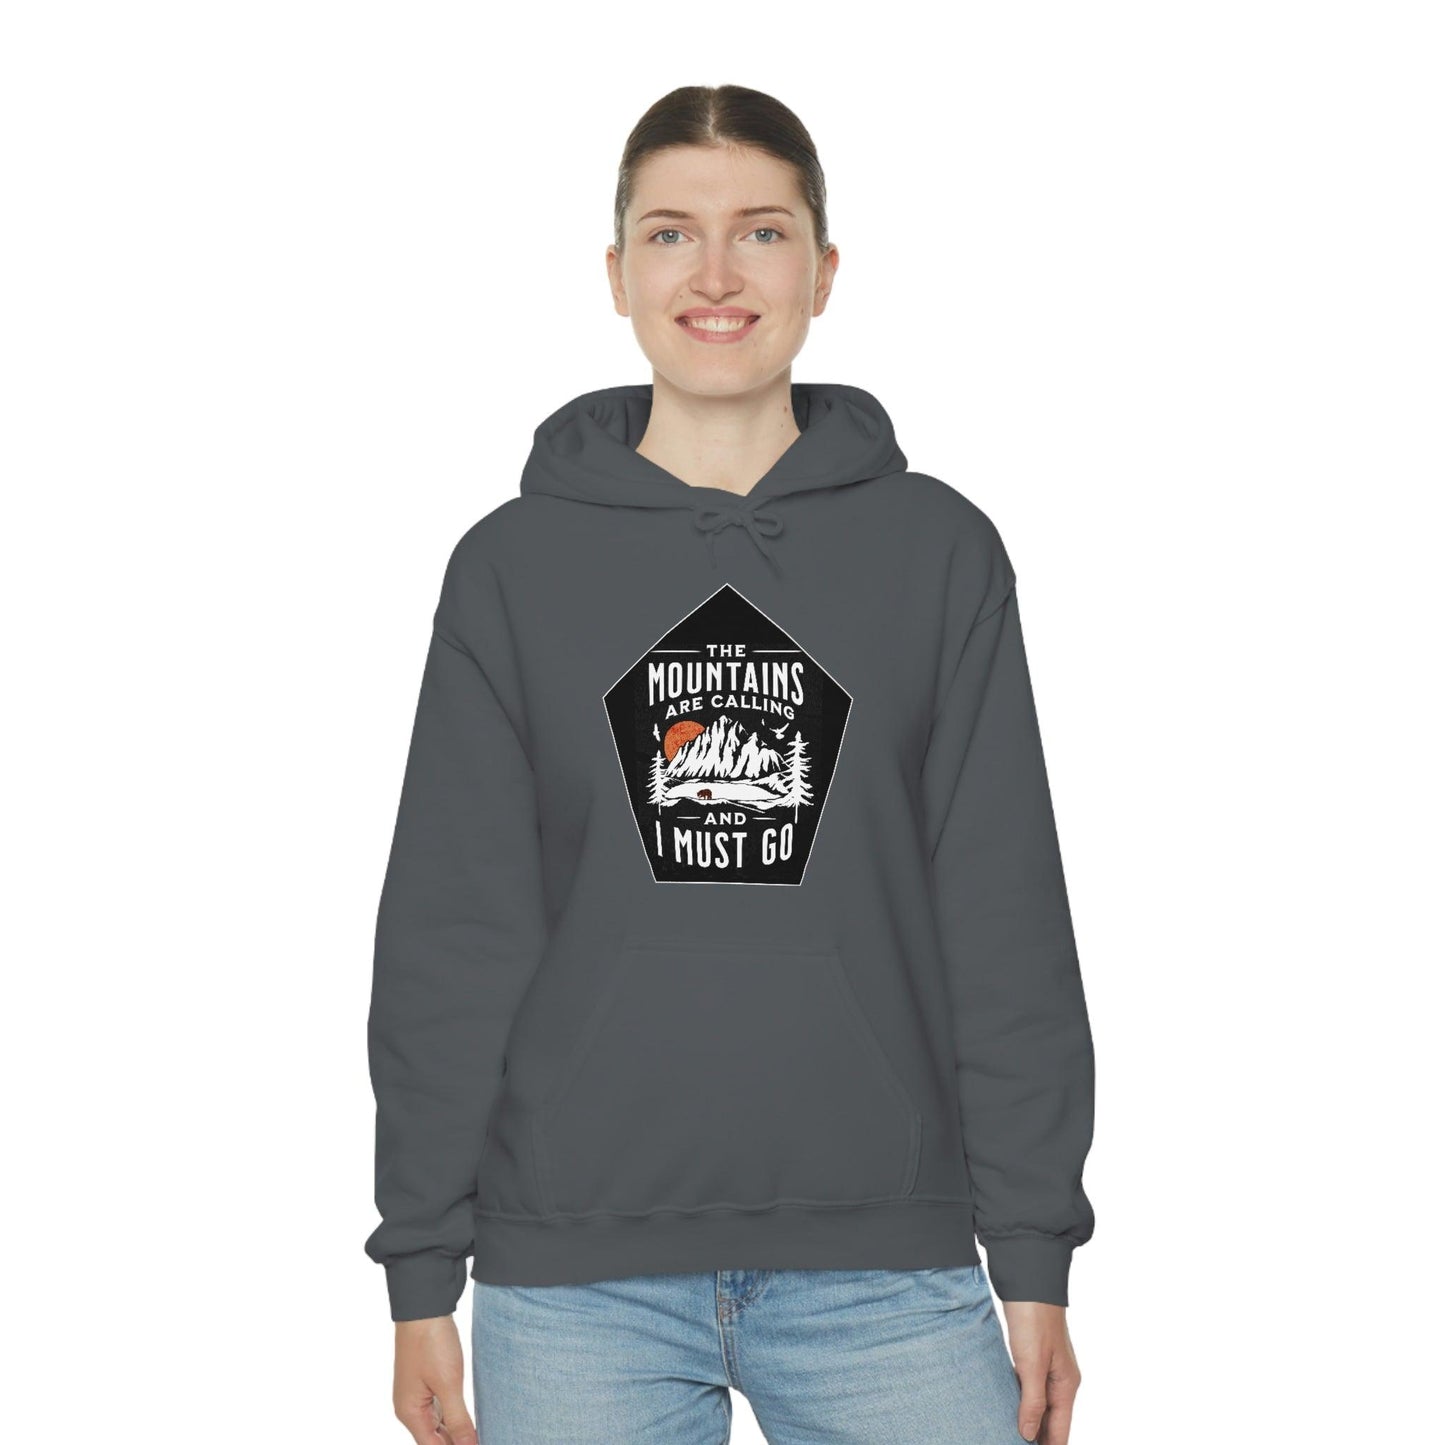 The Mountains are Calling and I Must Go, Hooded Sweatshirt - Giftsmojo